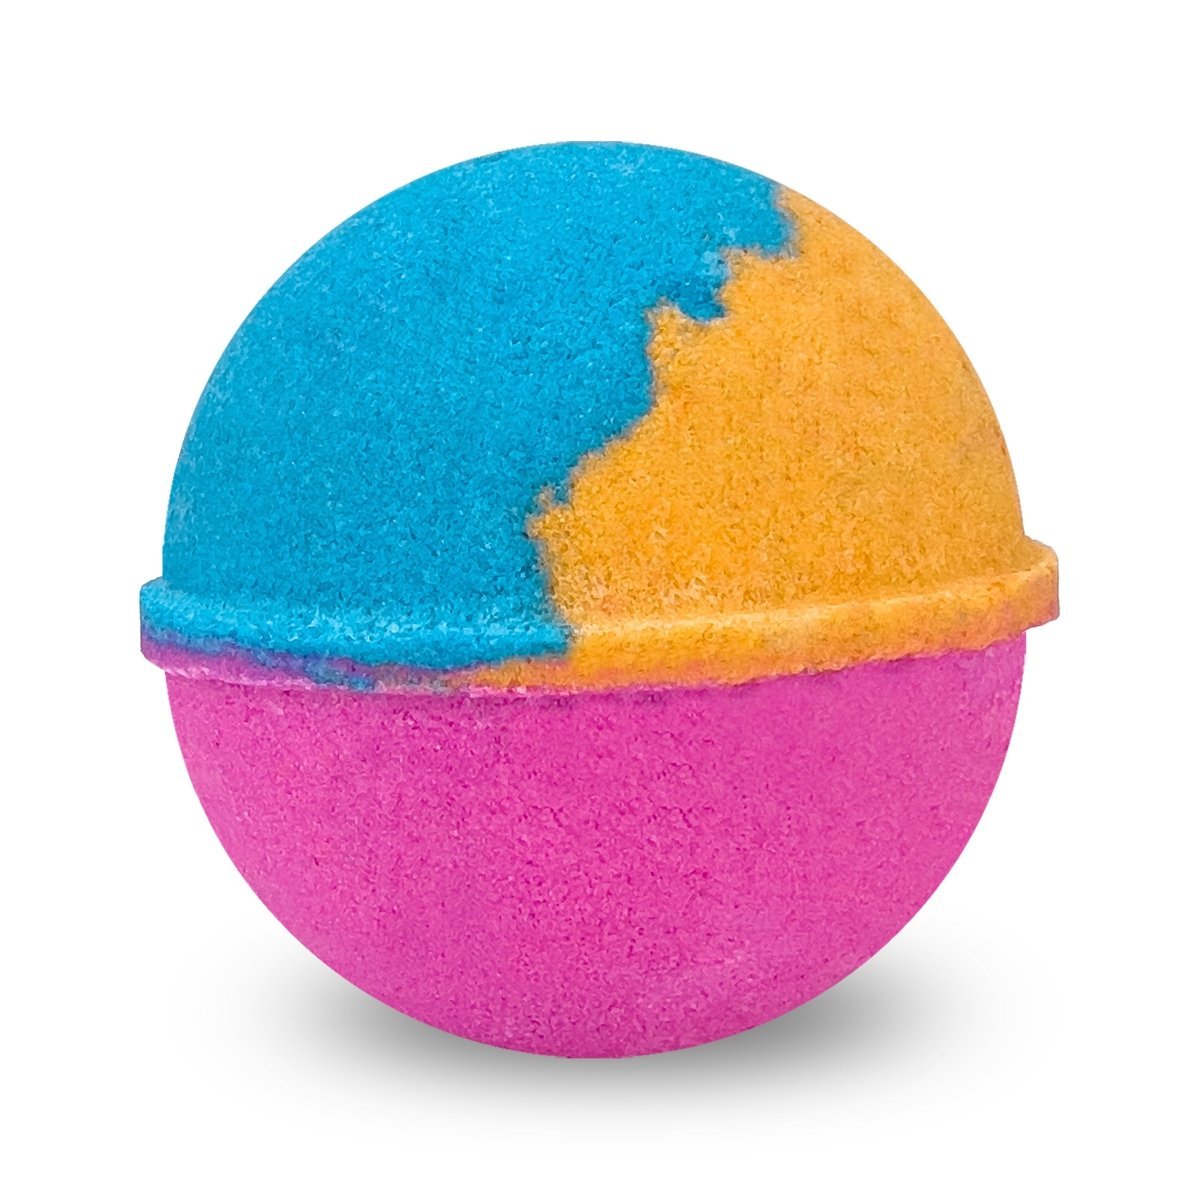 Masquerade Bath Bomb for Kids & Adults - Large Colourful Glitters & Marshmallow Fragrance - Made in Australia by Bath Box